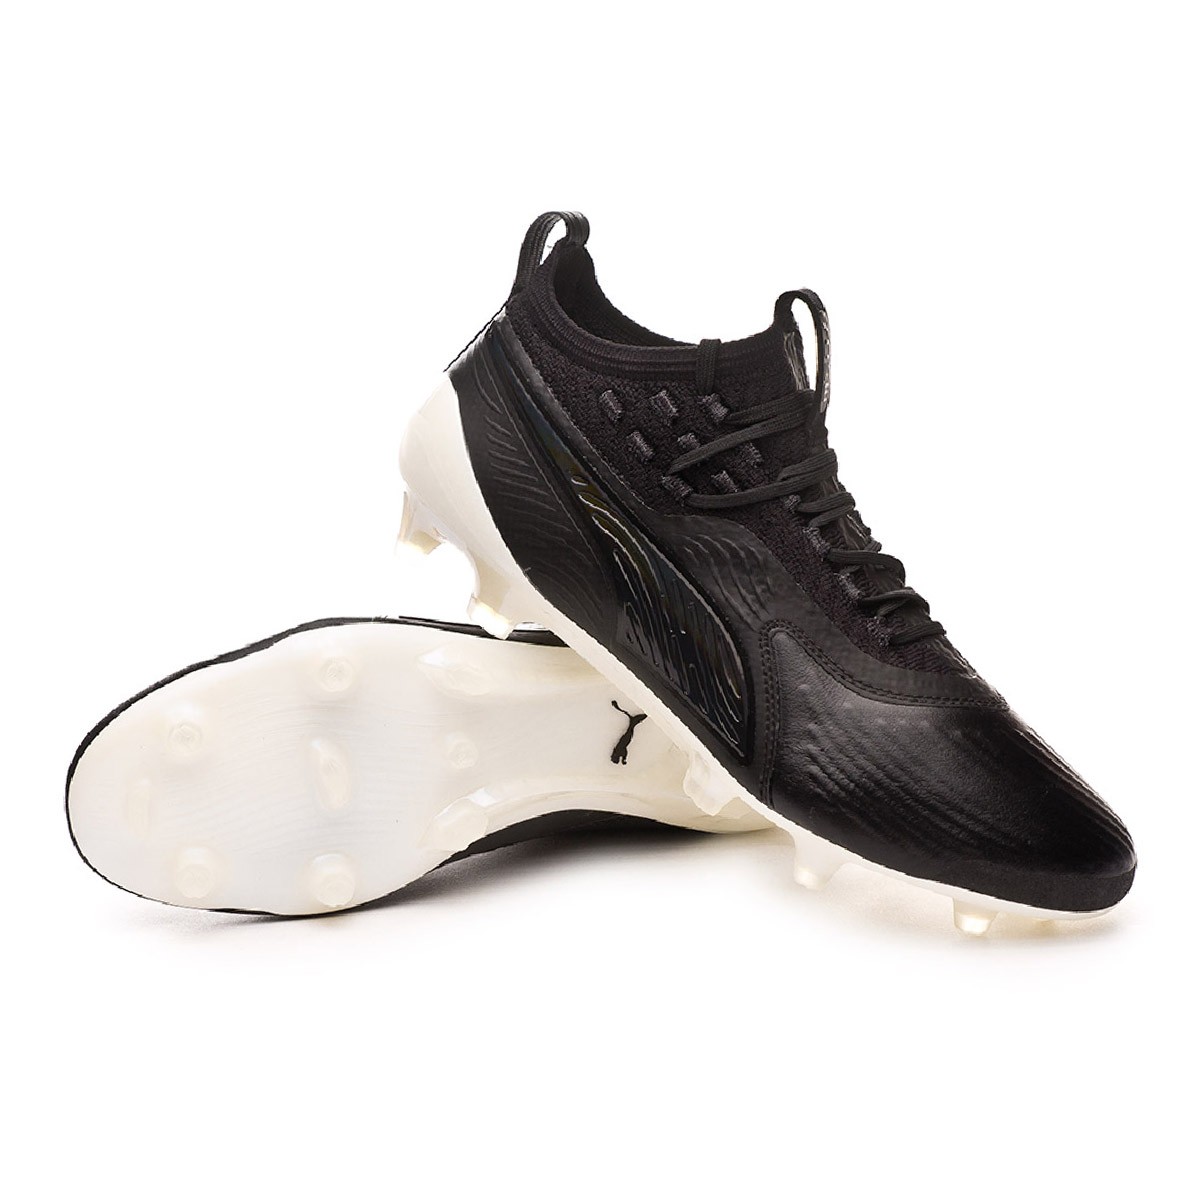 puma blackout football boots for sale